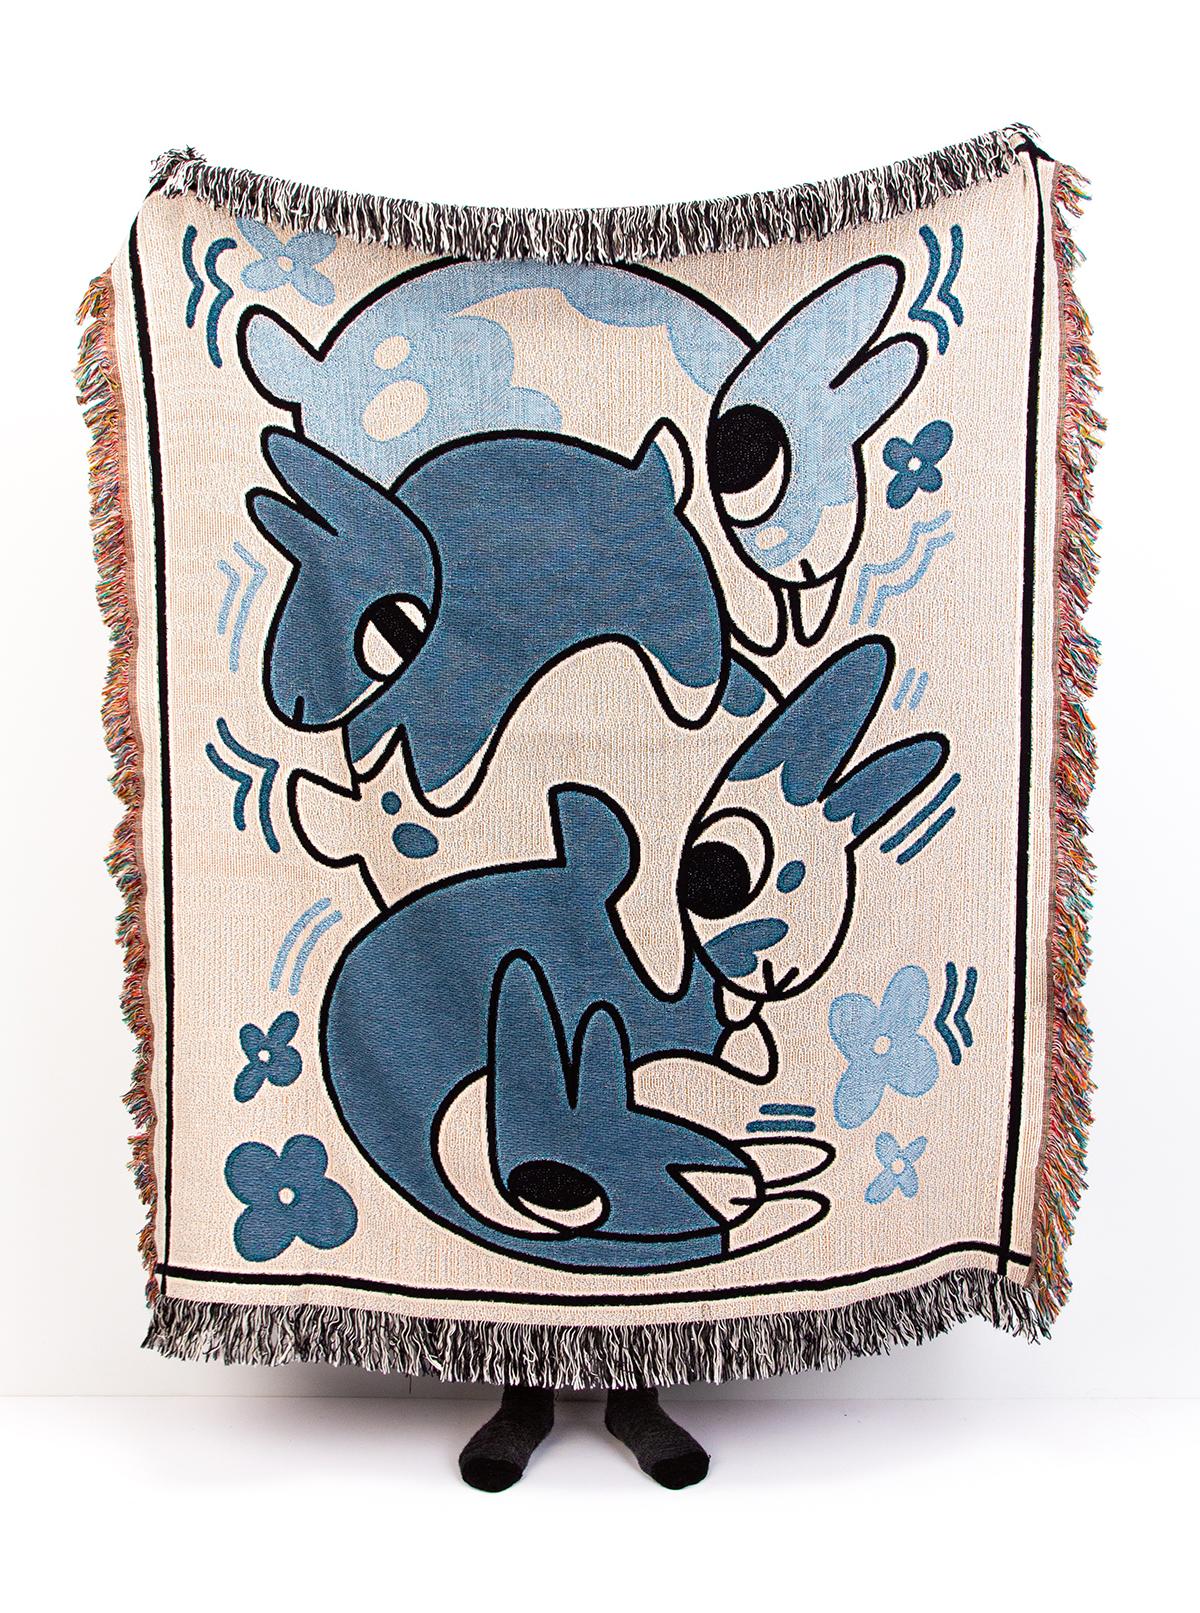 Lauren holds up a large throw quilt with an illustrated pattern of four stacked rabbits and flowers